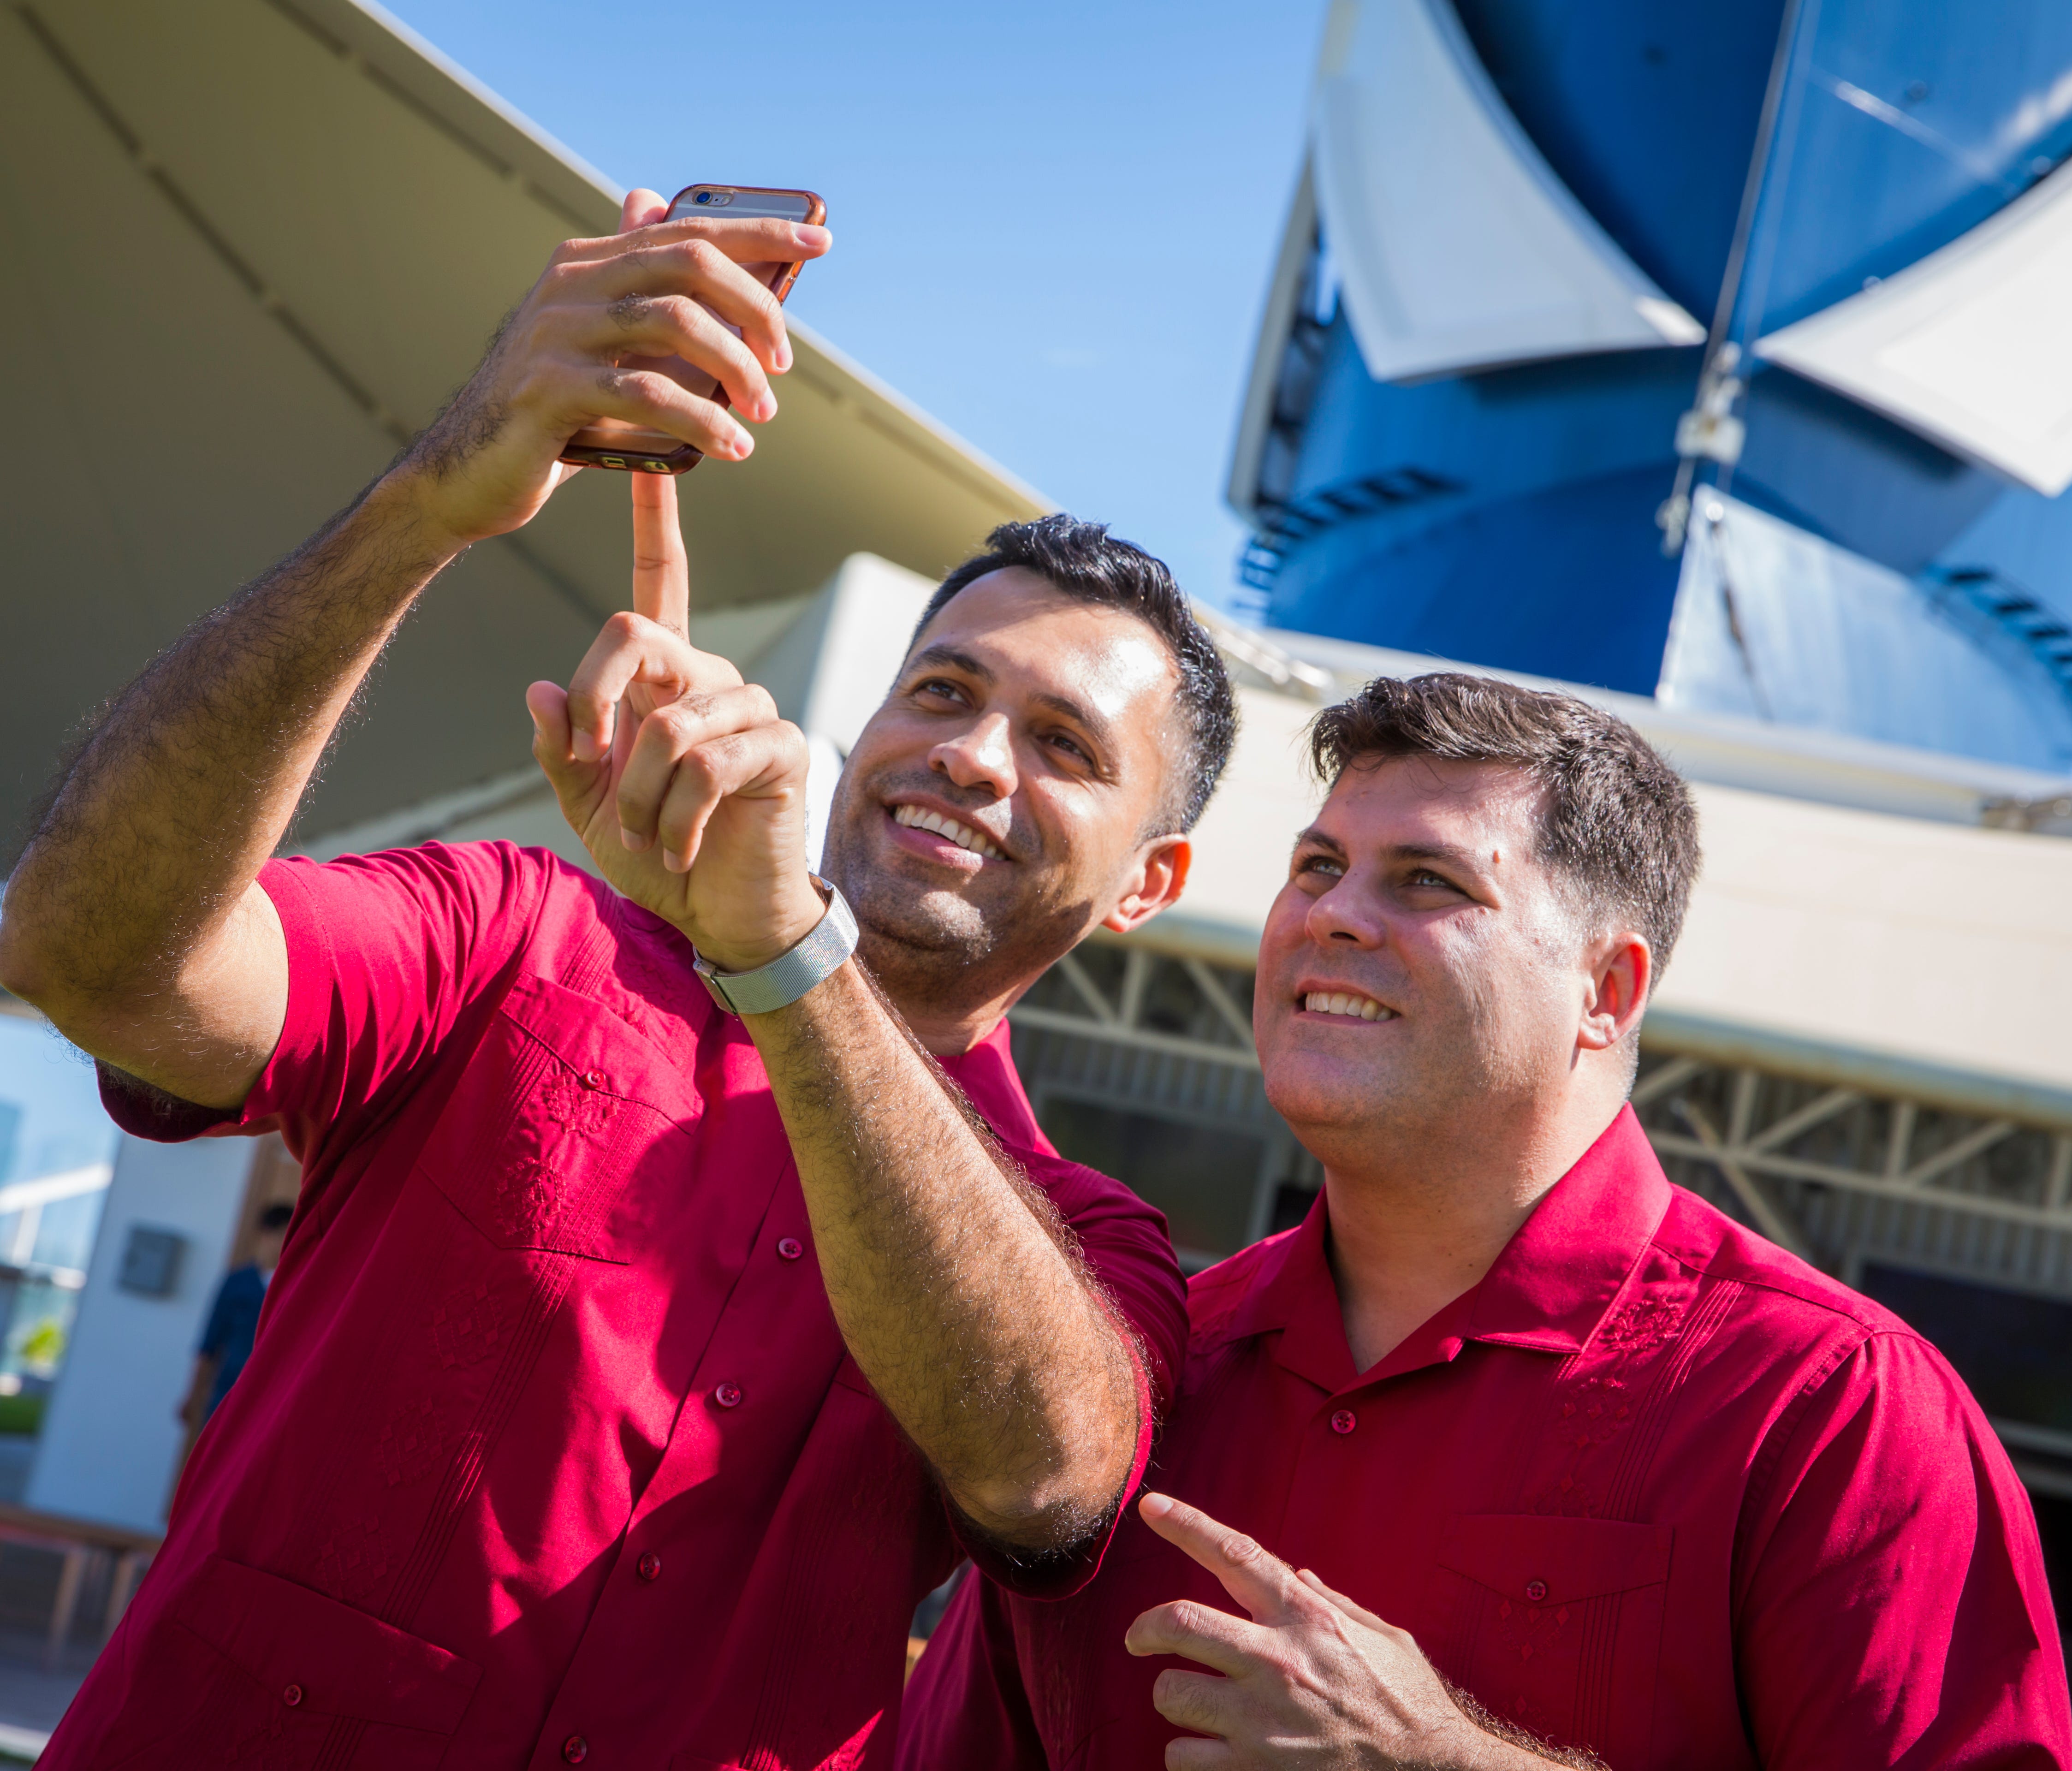 South Florida residents Francisco Vargas and Benjamin Gray became the first same-sex couple to be legally married at sea  on Jan. 29, 2018. They were sailing on Celebrity Cruises' Celebrity Equinox.